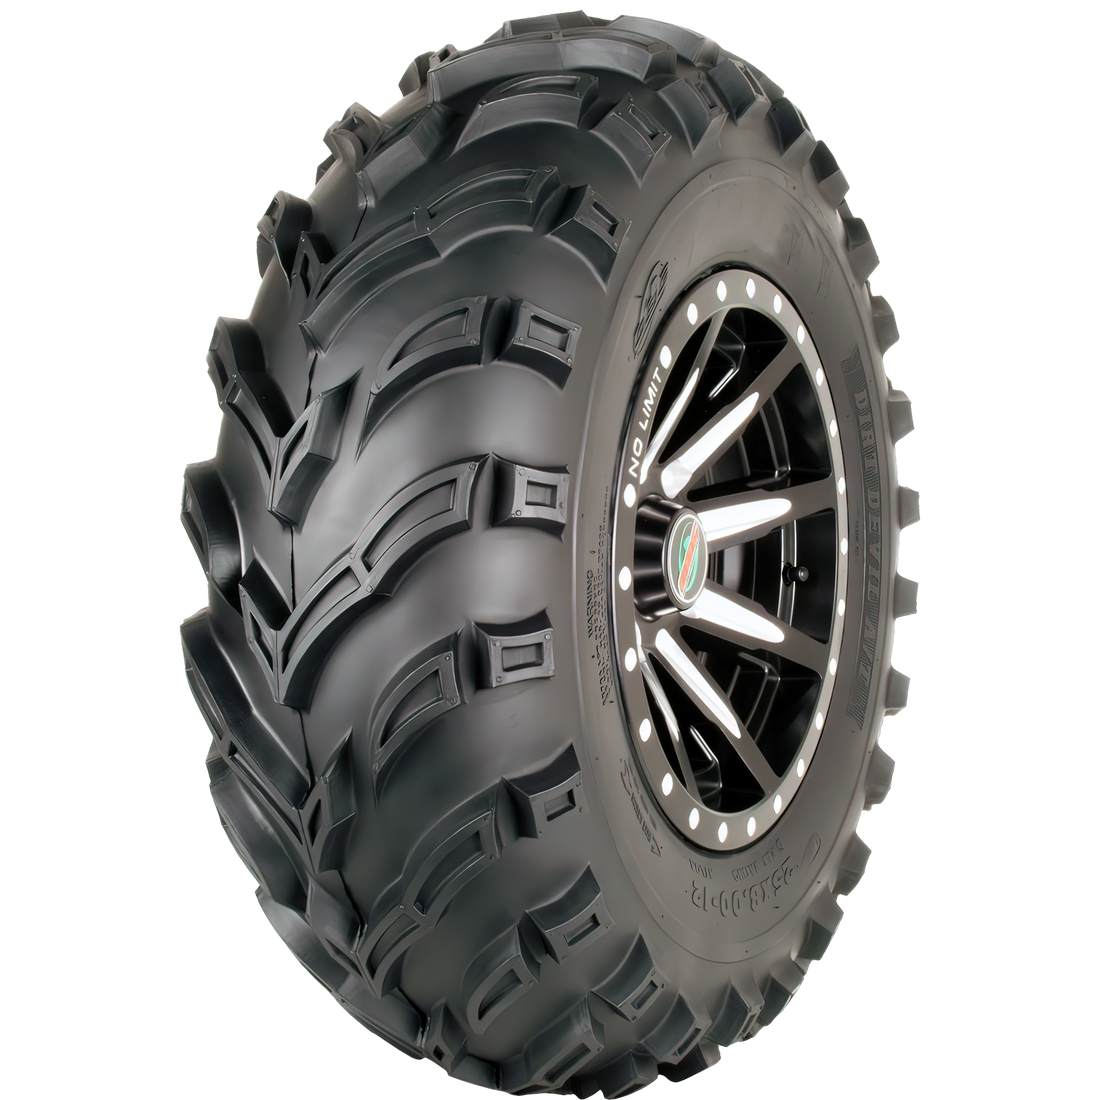 Angle view of Dirt Devil Powersport tire for ATVs and UTVs, showcasing the high-traction tread, sturdy sidewall, and sleek rim, ideal for off-road terrains.